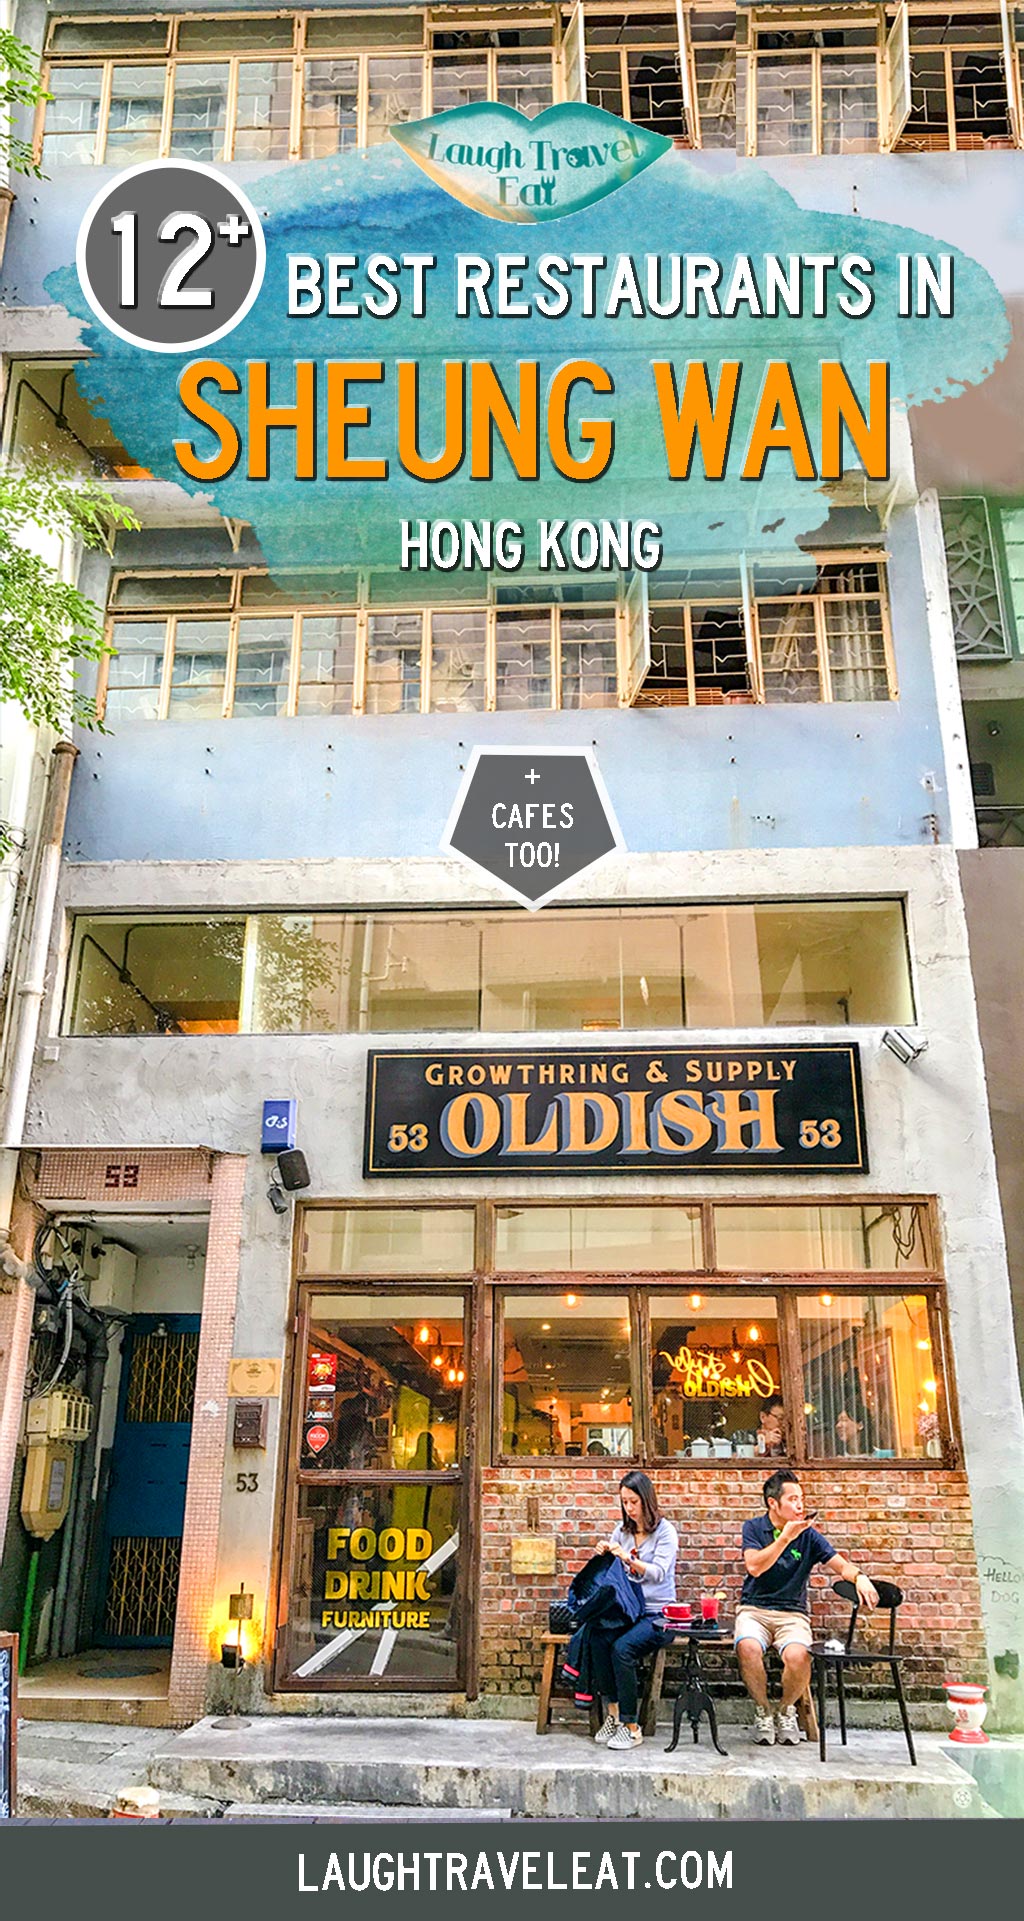 Sheung Wan has a wide range of restaurants and cafes that would take you weeks, nay, months, to discover. But lucky for you, I have spent a fair amount of time eating around the neighbourhood. This is an extension of my favourite restaurants in Hong Kong guide, specifically focused on Sheung Wan. #SheungWan #HongKong #Food #restaurants